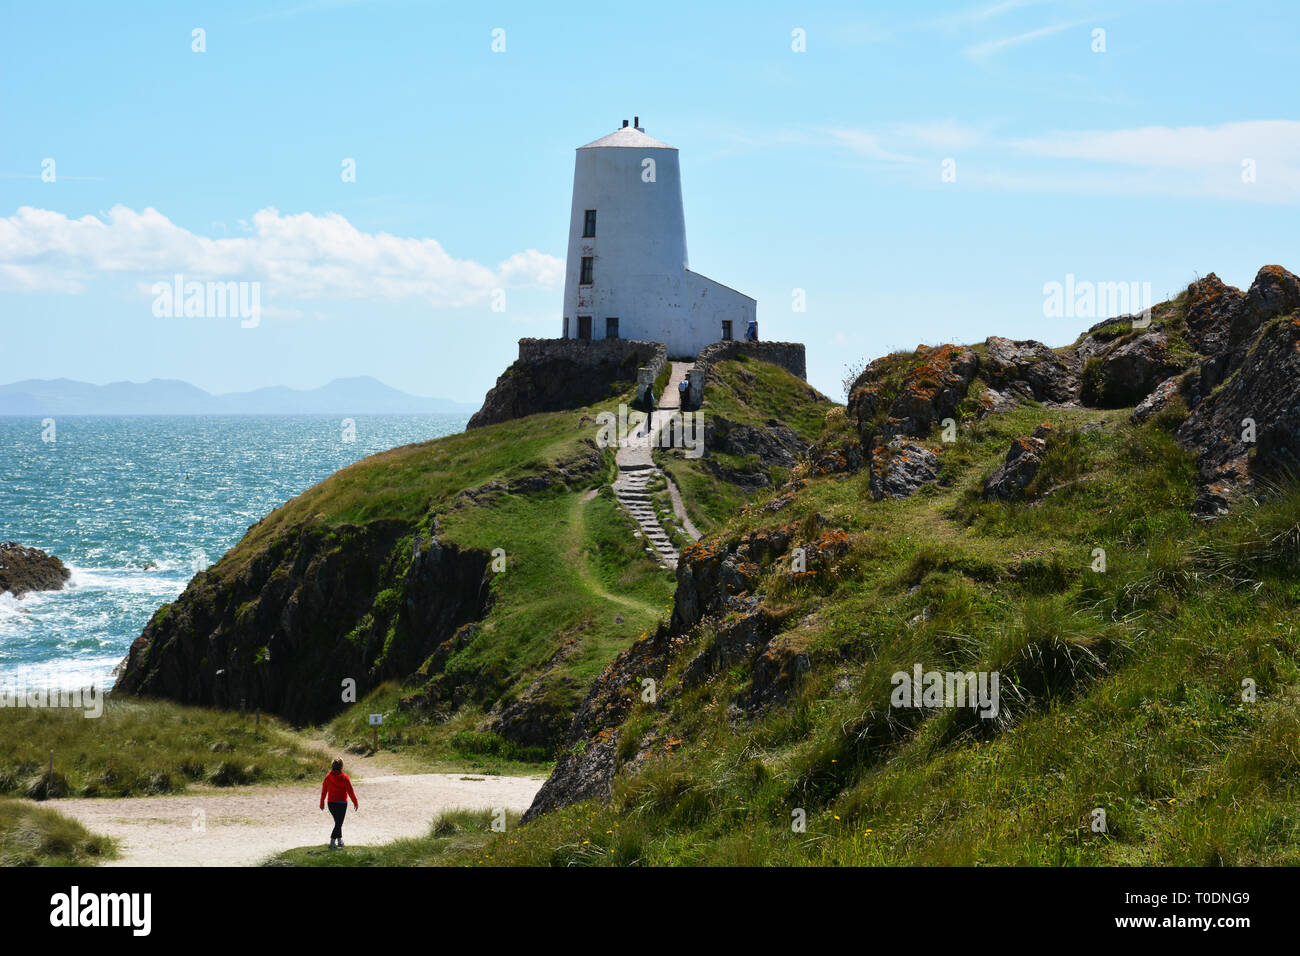 Walking towards the iconic Twr Mawr lighthouse on Llanddwyn Island which is situated of the coast of Anglesey in North Wales. Stock Photo